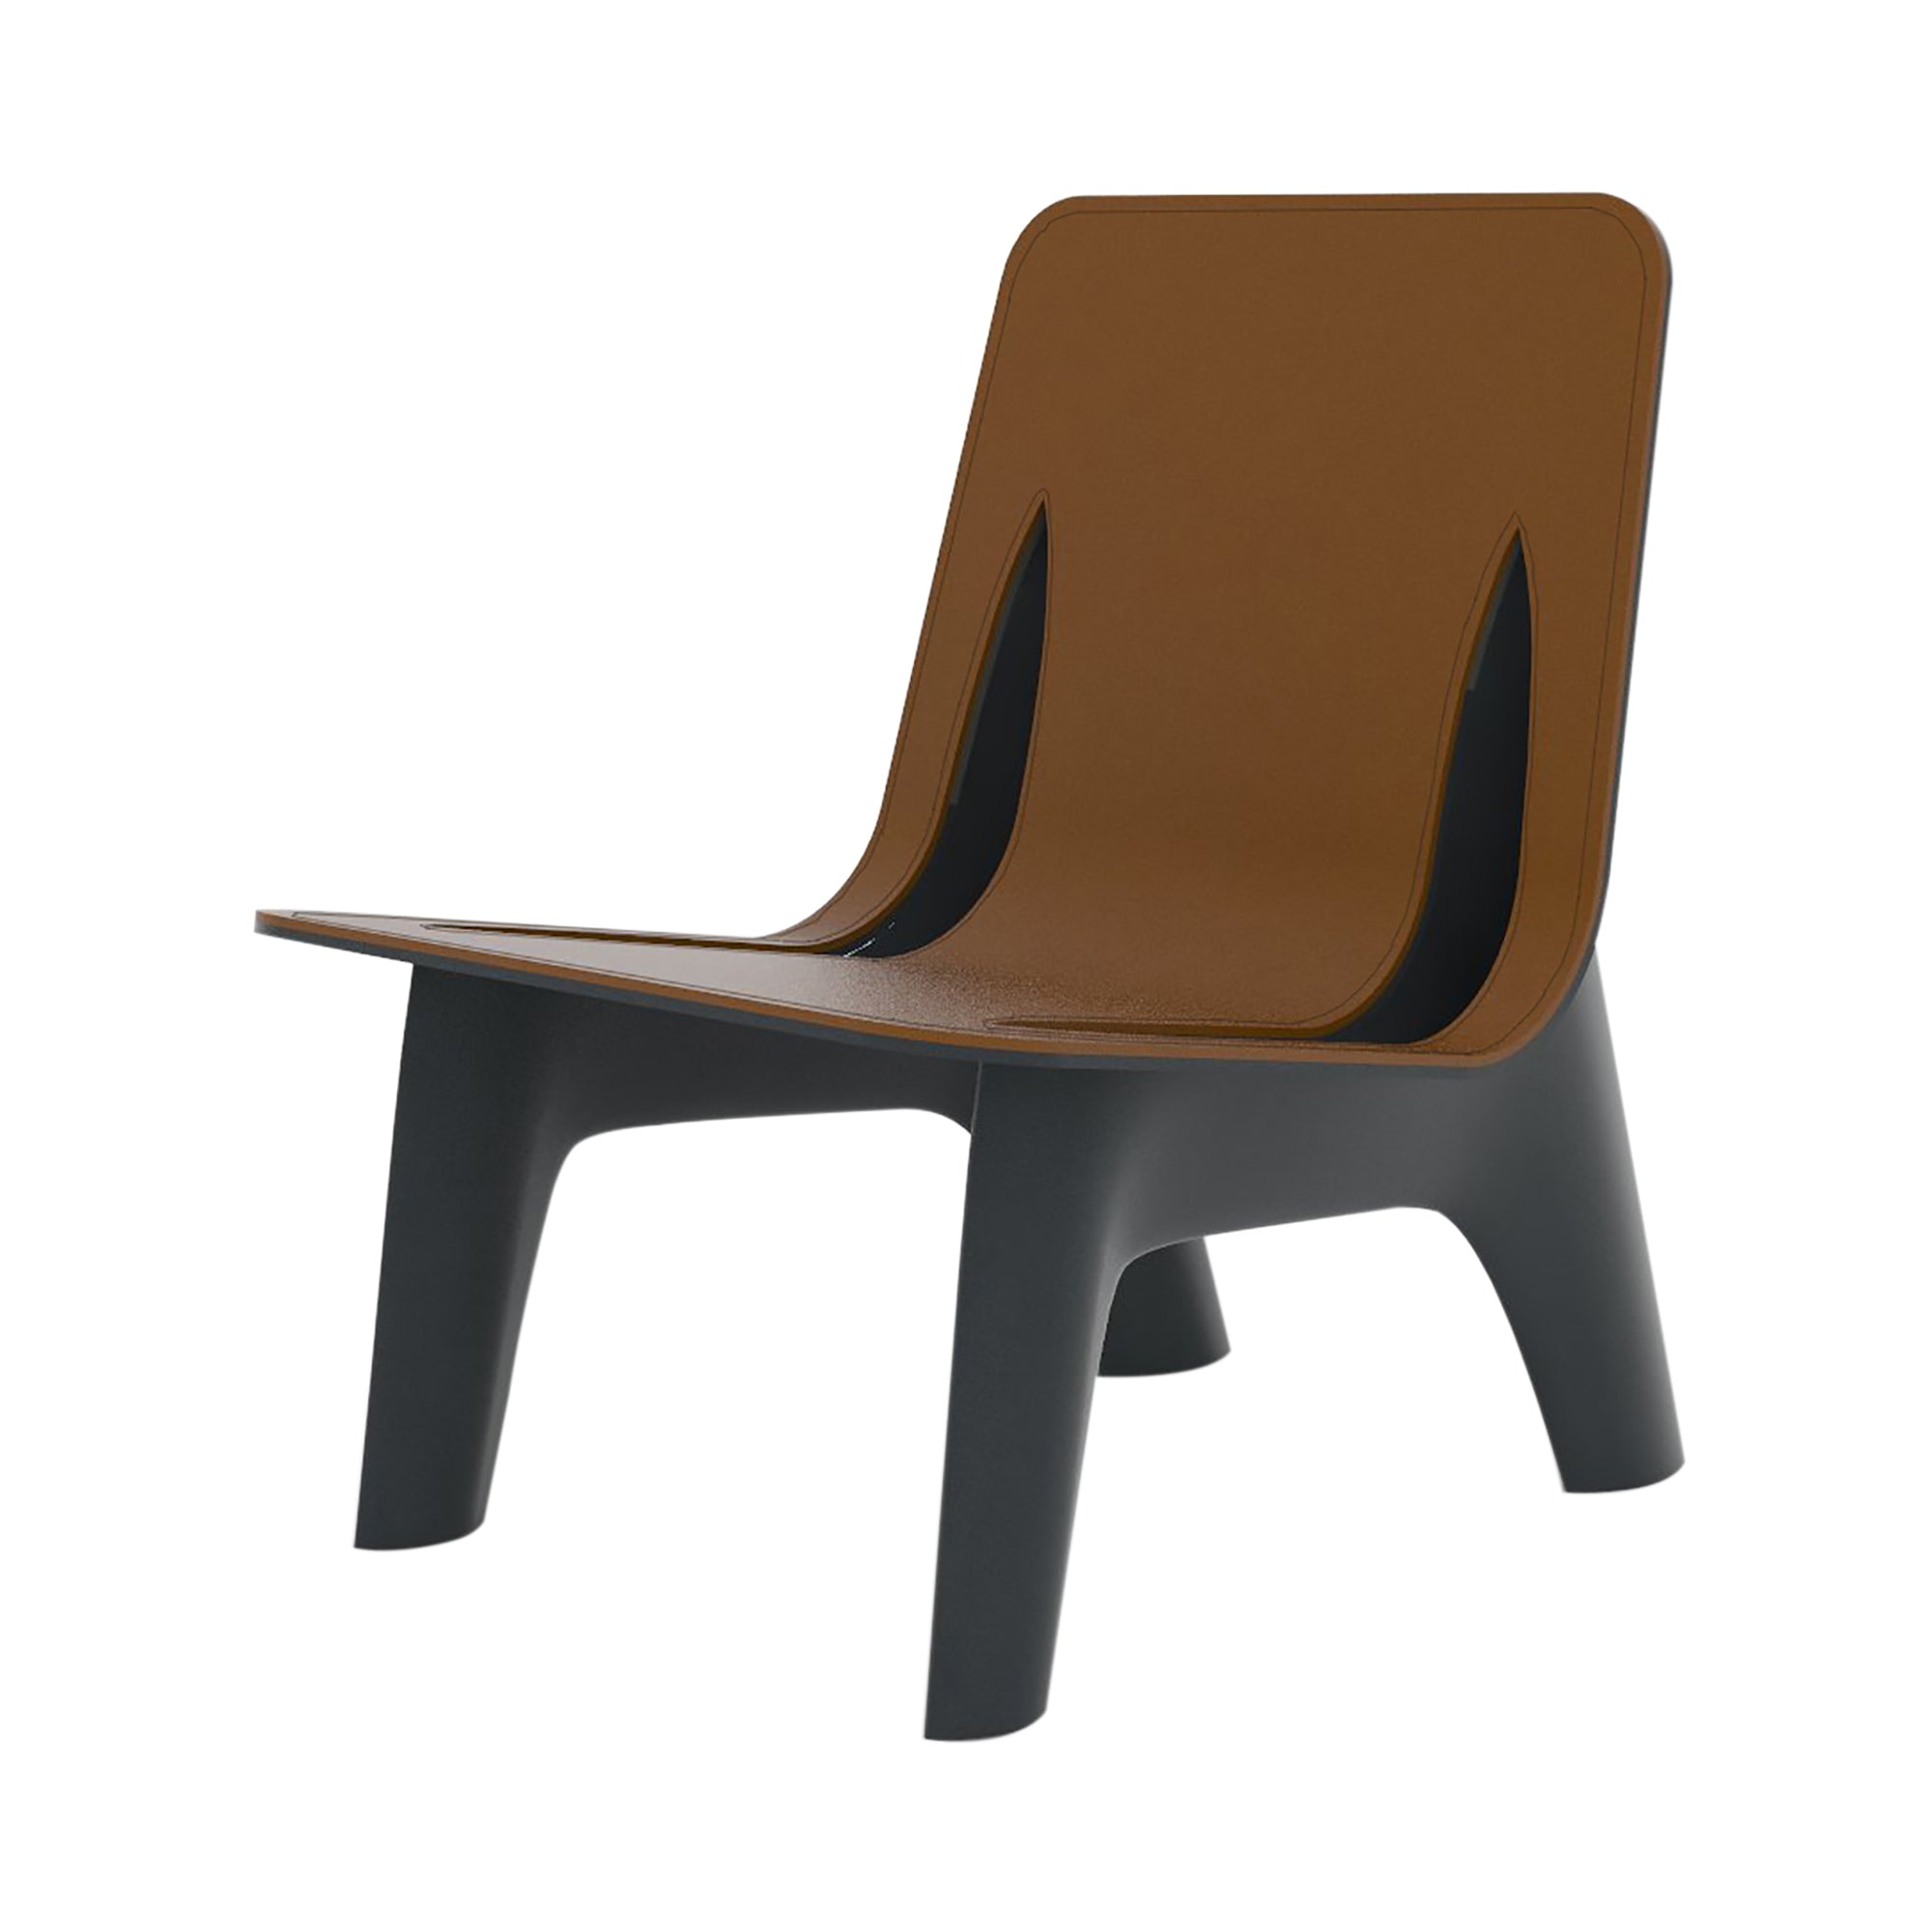 J-Chair Lounge: Leather Seat + Aluminum + Graphite Grey + Brown